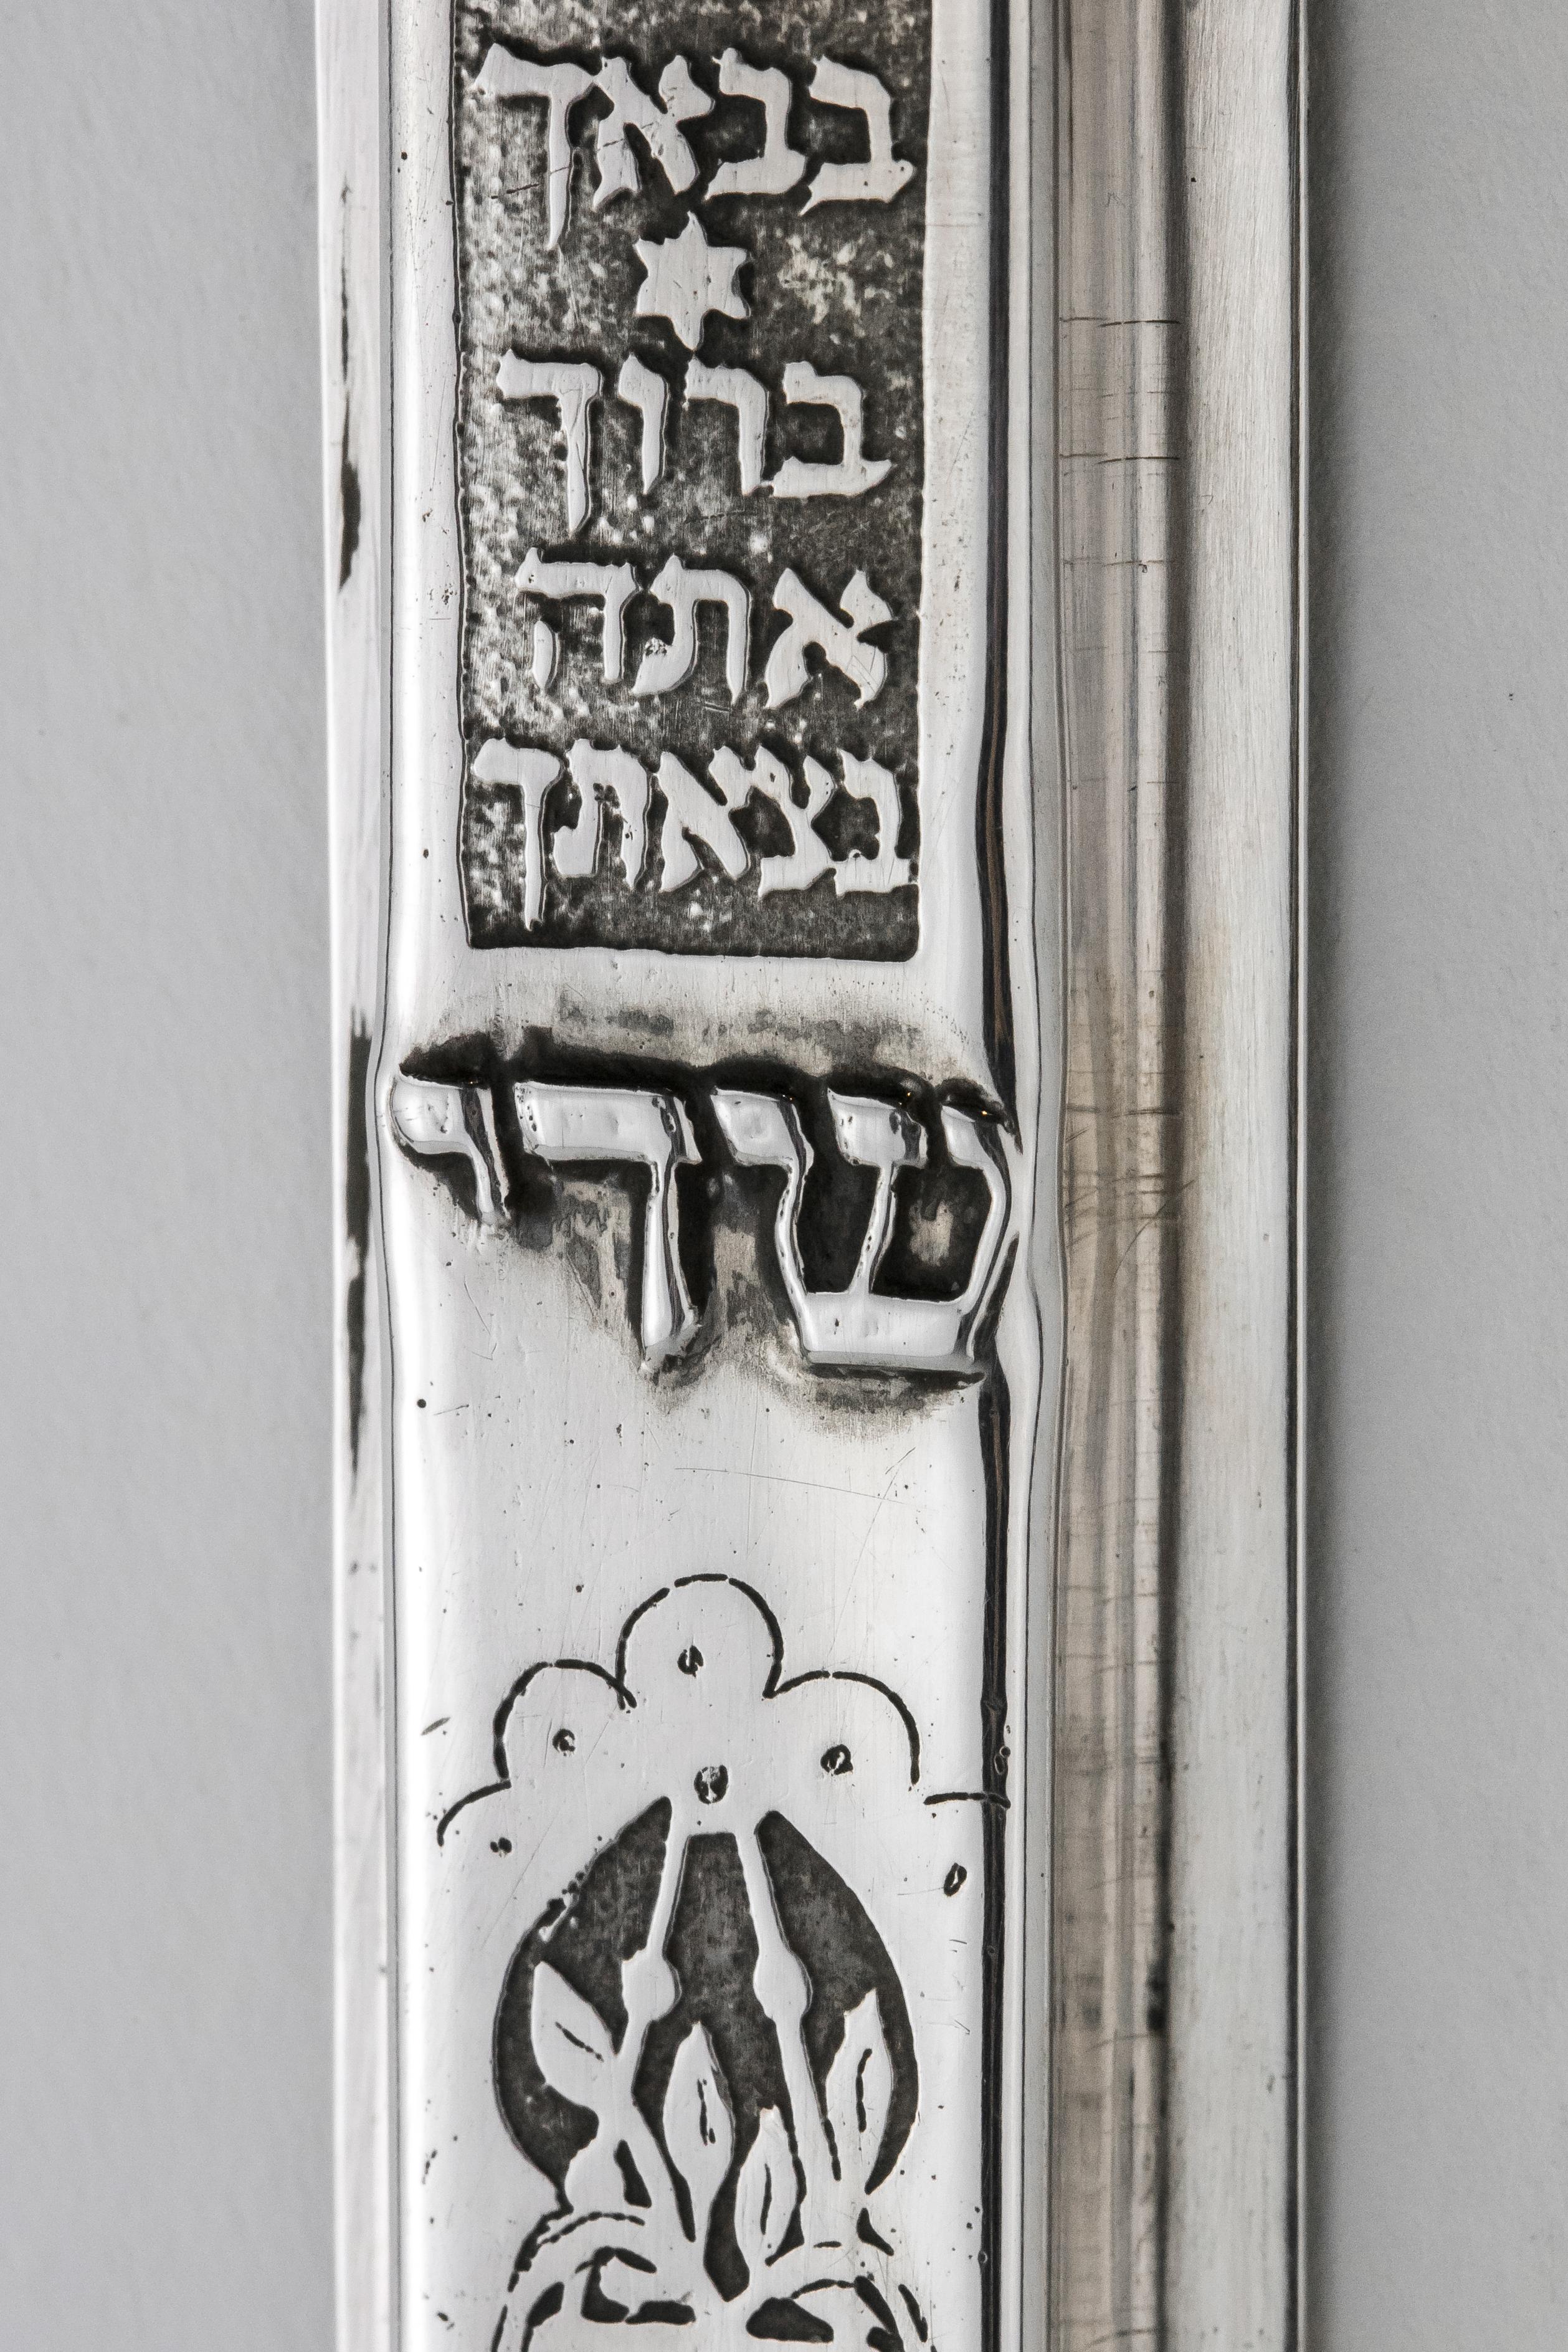 Acid-etched silver Mezuzah by Bezalel School Jerusalem, circa 1925.
The Mezuzah is a tiny receptacle that houses a parchment scroll which contains two verses from the scriptures. It is attached to the doorway of every Jewish home.
This Mezuzah